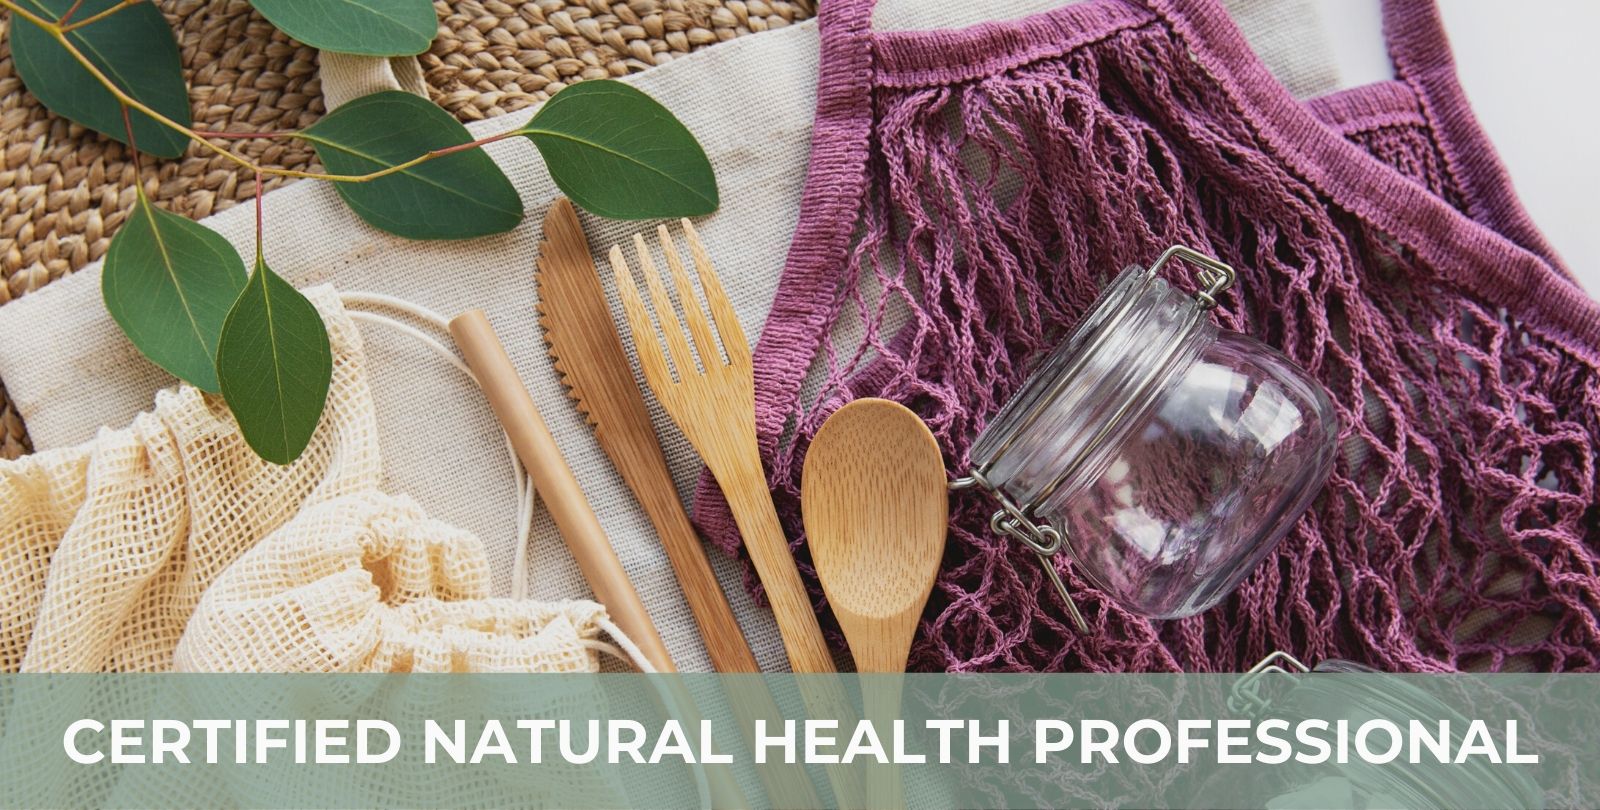 Certified Natural Health Professional | Trinity School of Natural Health